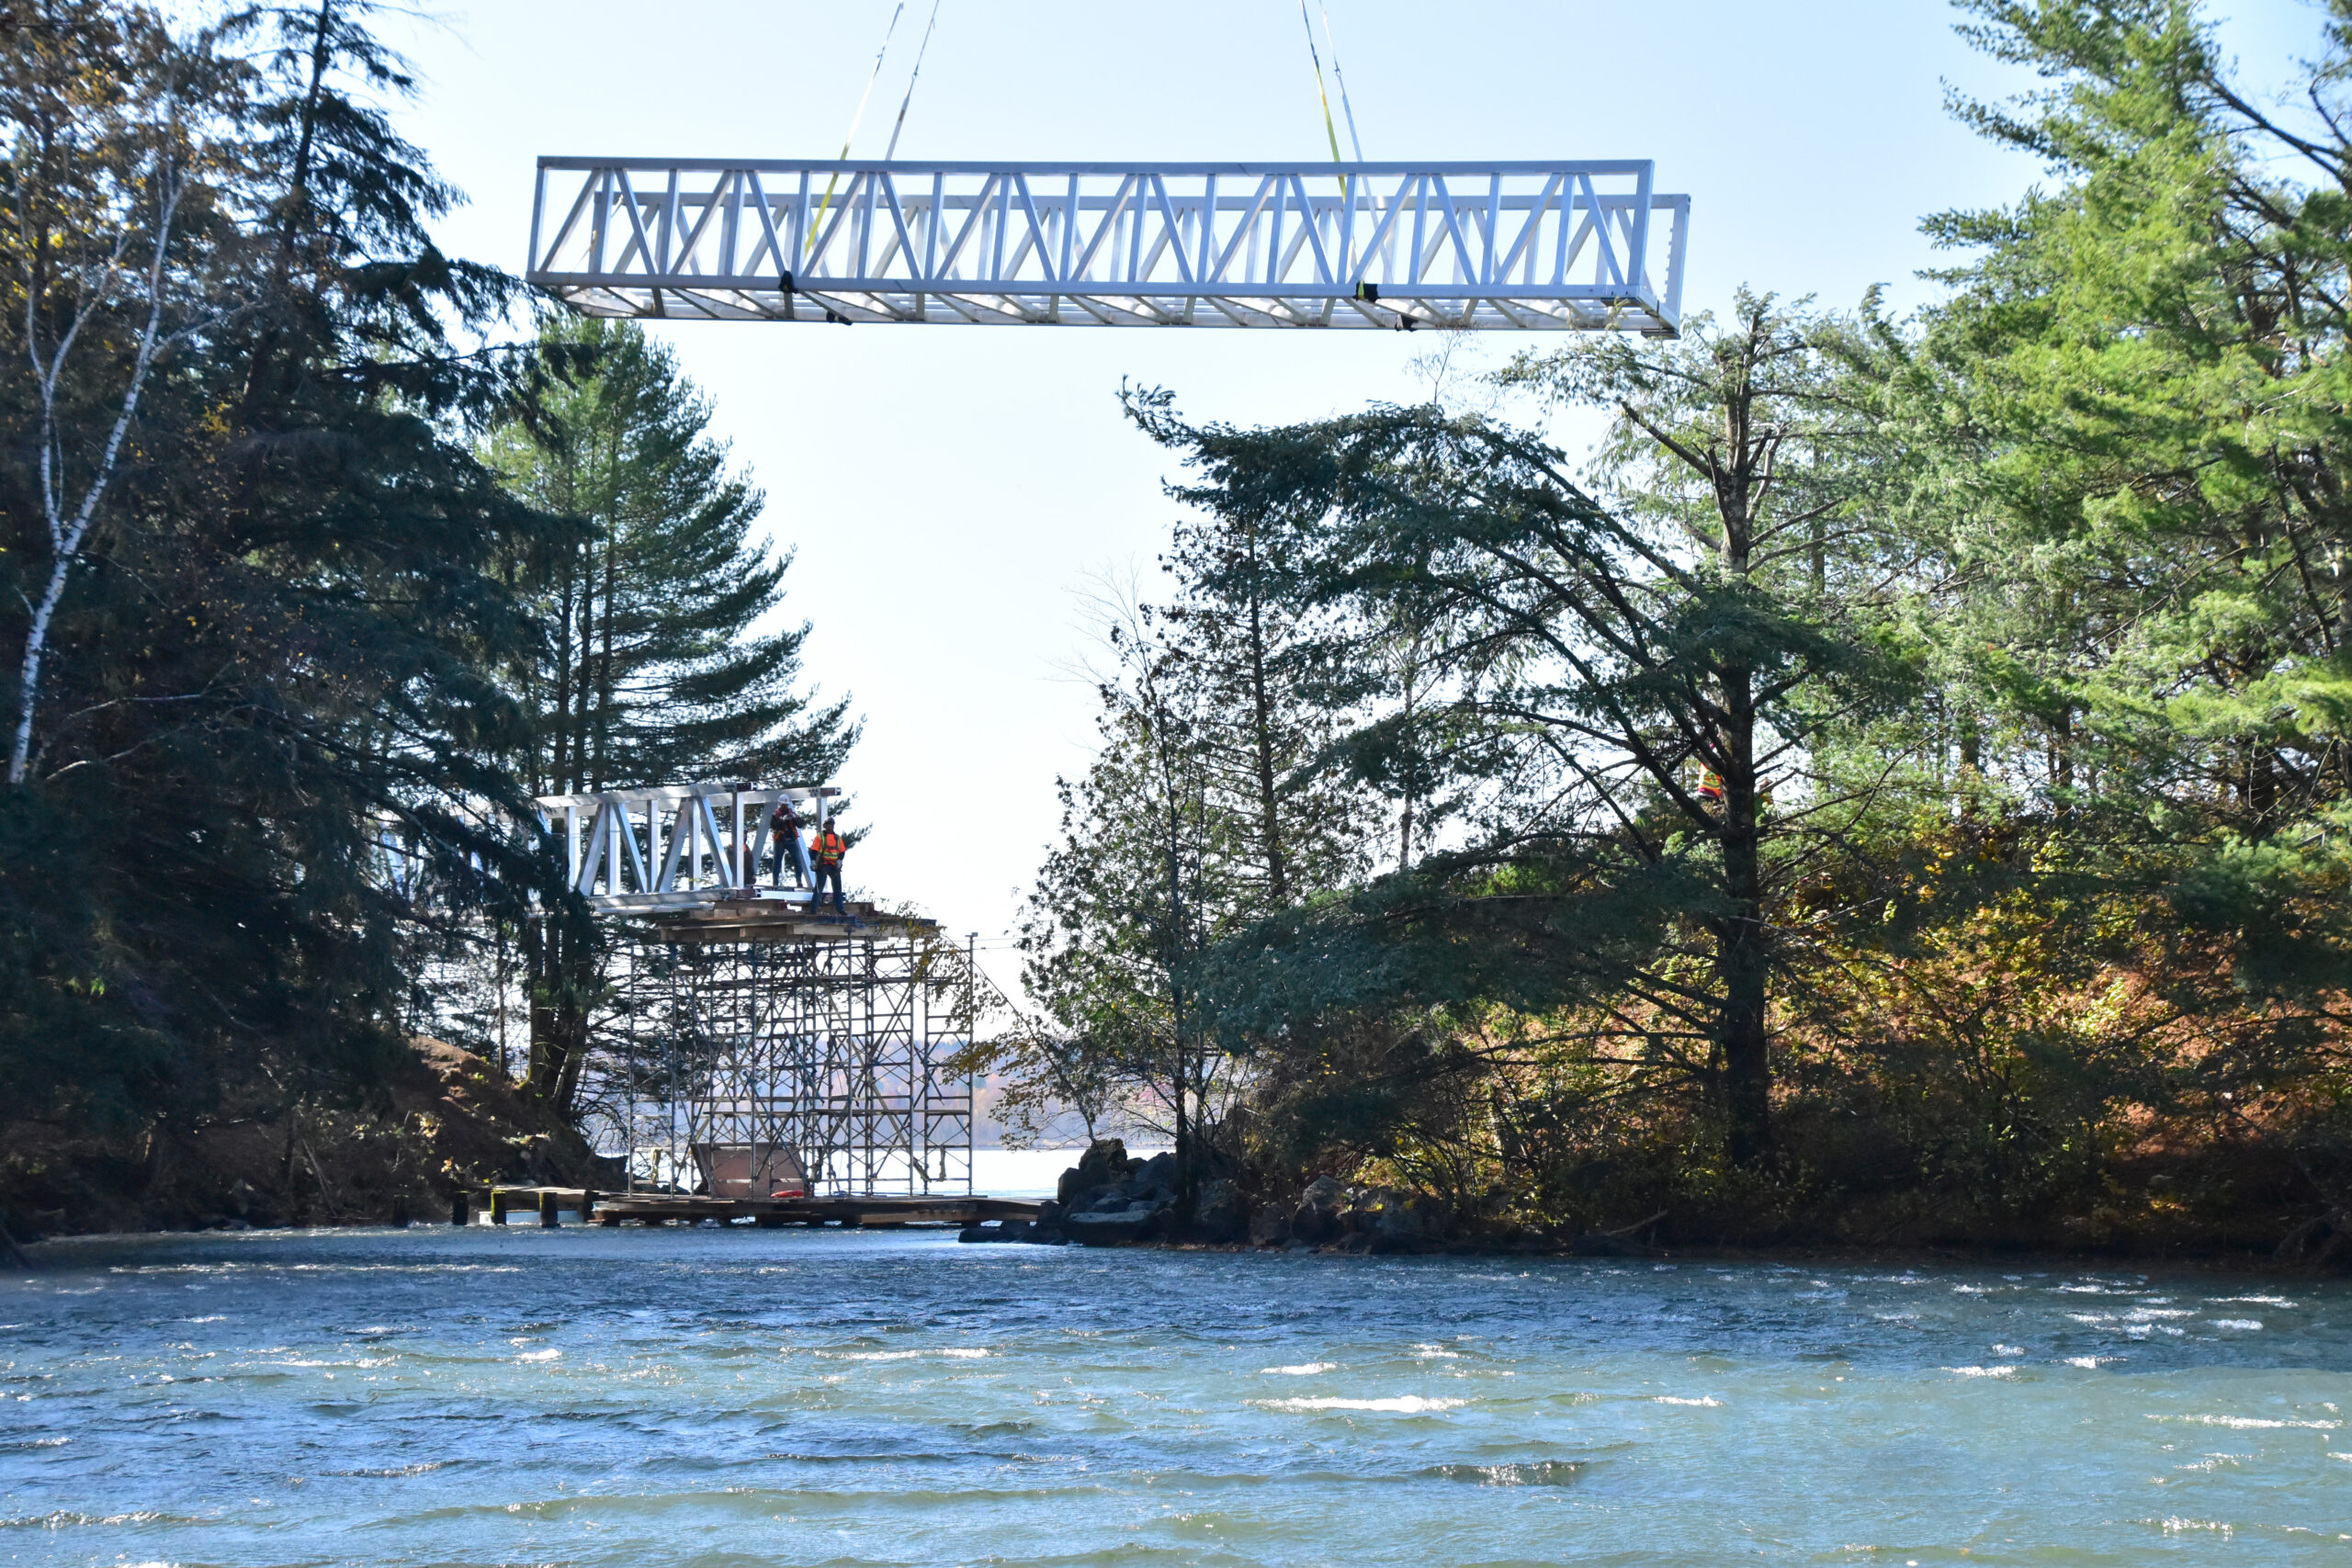 Custom pedestrian bridge being lowered into place over lake in Canada